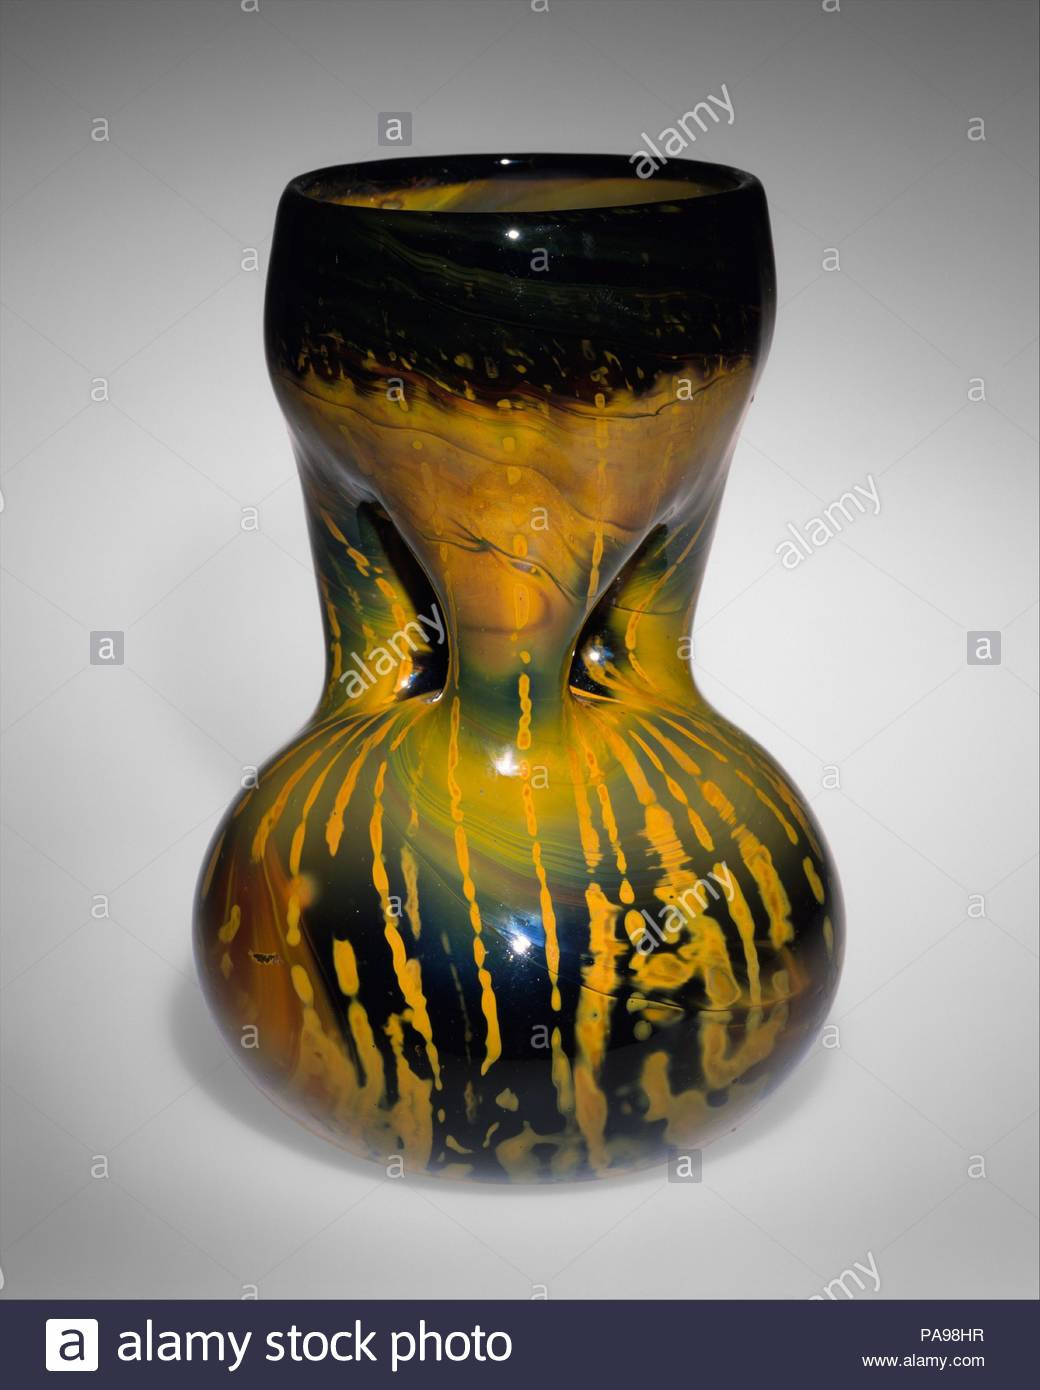 14 Ideal Lc Tiffany Favrile Vase 2024 free download lc tiffany favrile vase of 1848 96 stock photos 1848 96 stock images alamy for vase culture american designer designed by louis comfort tiffany american